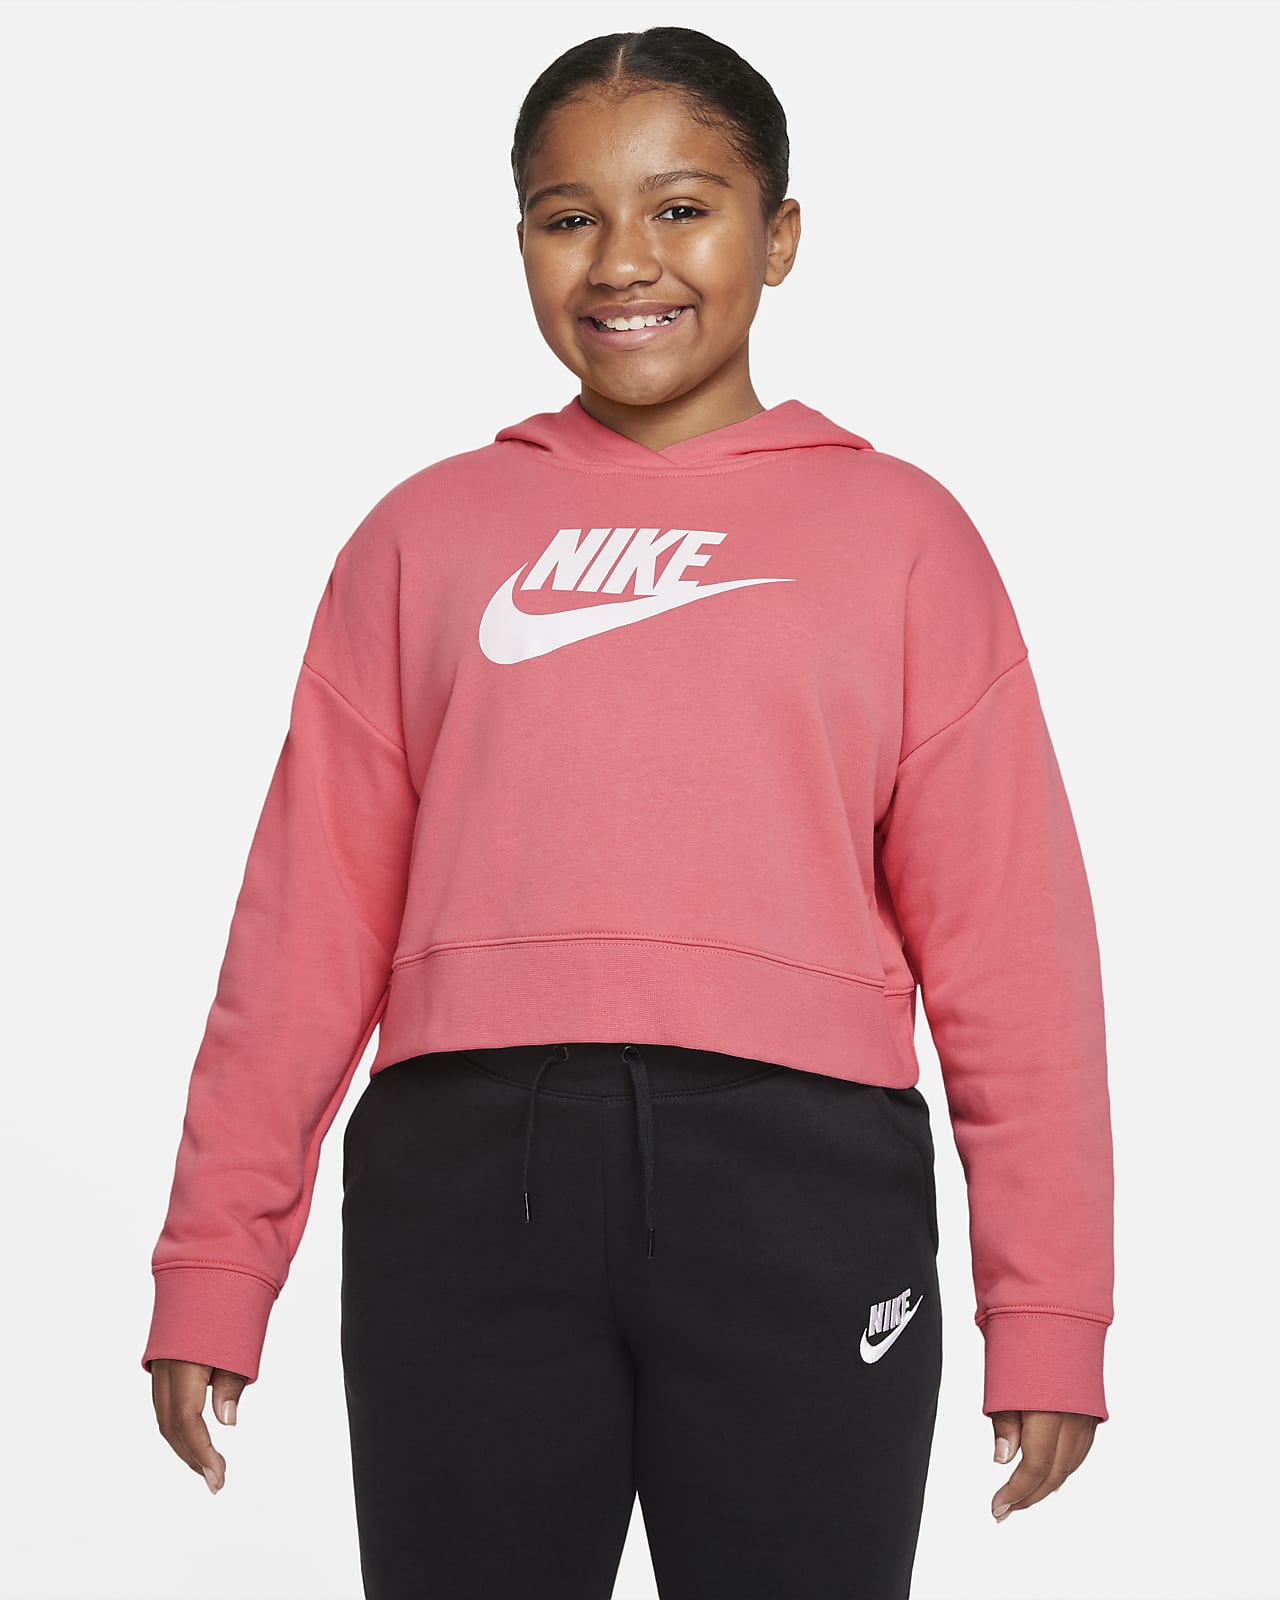 https://static.nike.com/a/images/t_PDP_1280_v1/f_auto,q_auto:eco/a390f65a-235b-48d2-beac-78ff4d614719/sportswear-club-big-kids-girls-french-terry-cropped-hoodie-extended-size-0Vjv8Z.png